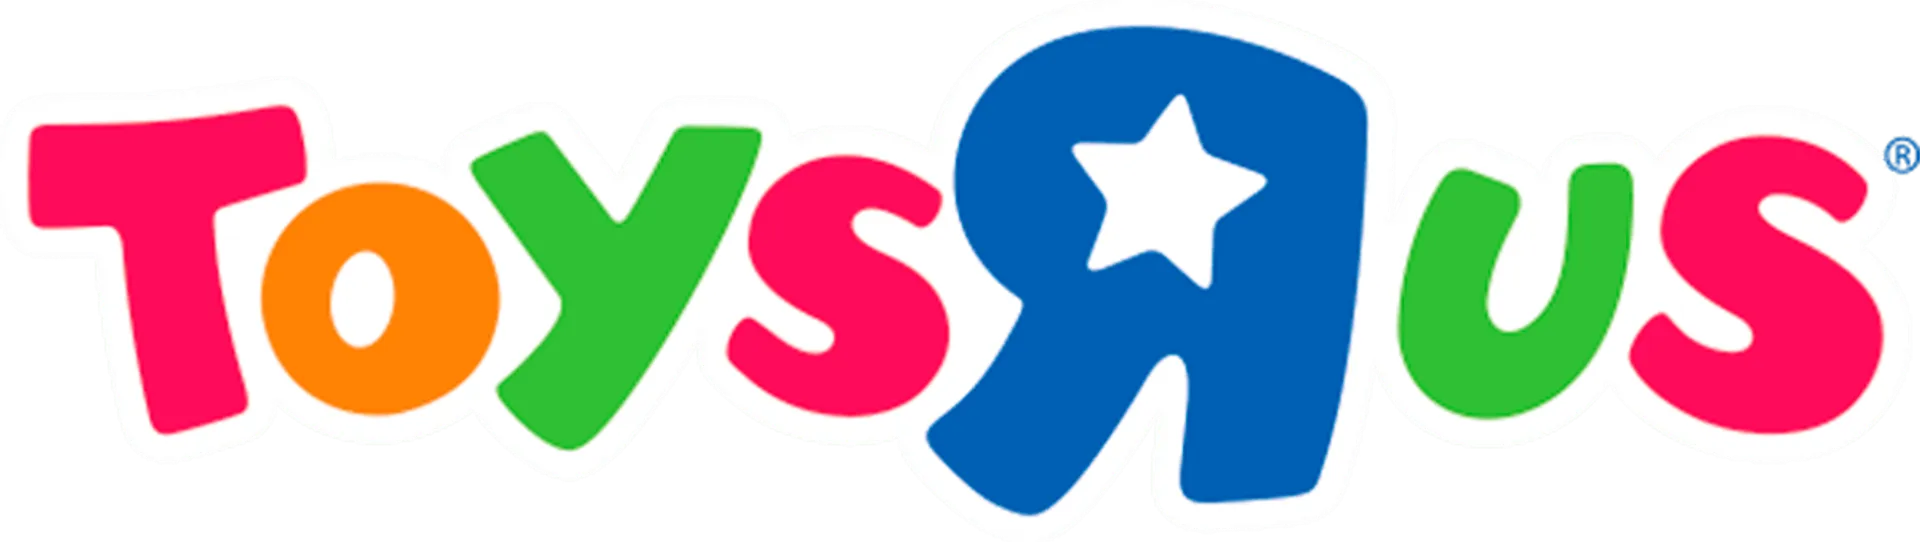 TOYS ”R” US logo. Current catalogue